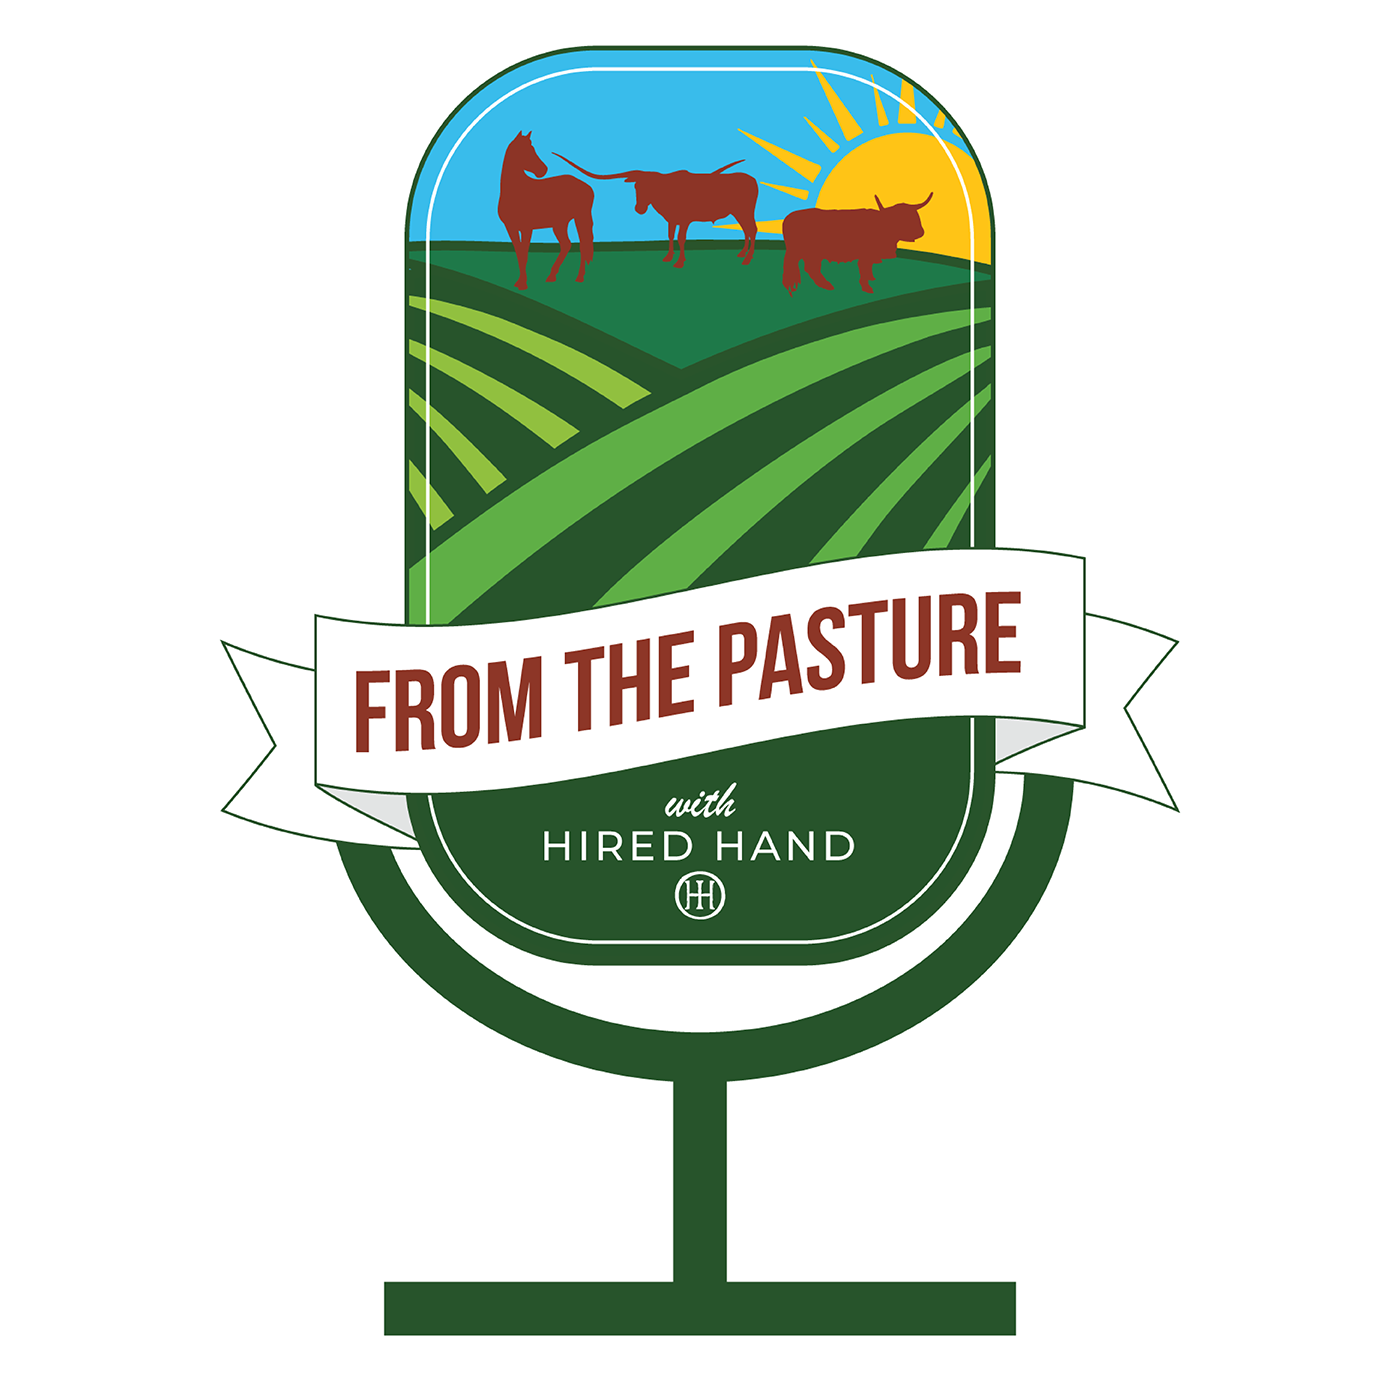 From the Pasture with Hired hand